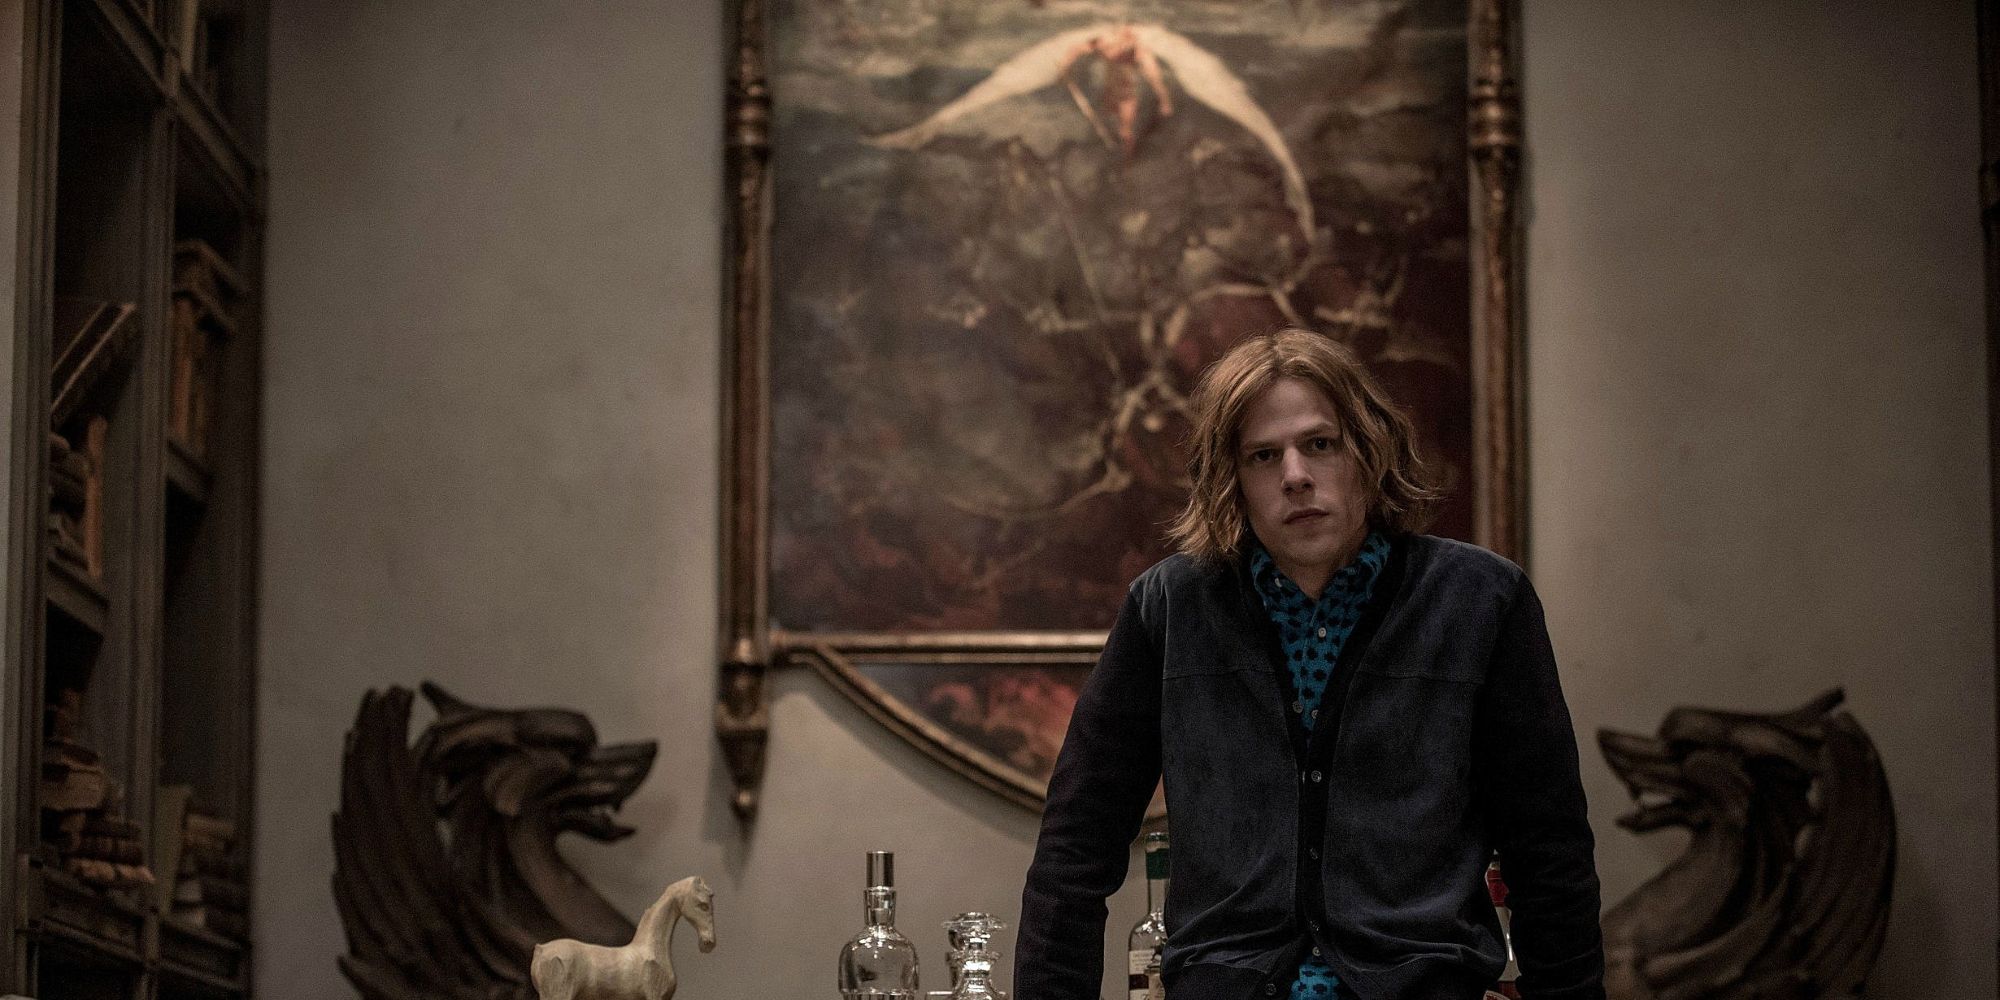 Lex Luthor sitting on his desk by his painting of angels and demons in Batman v Superman